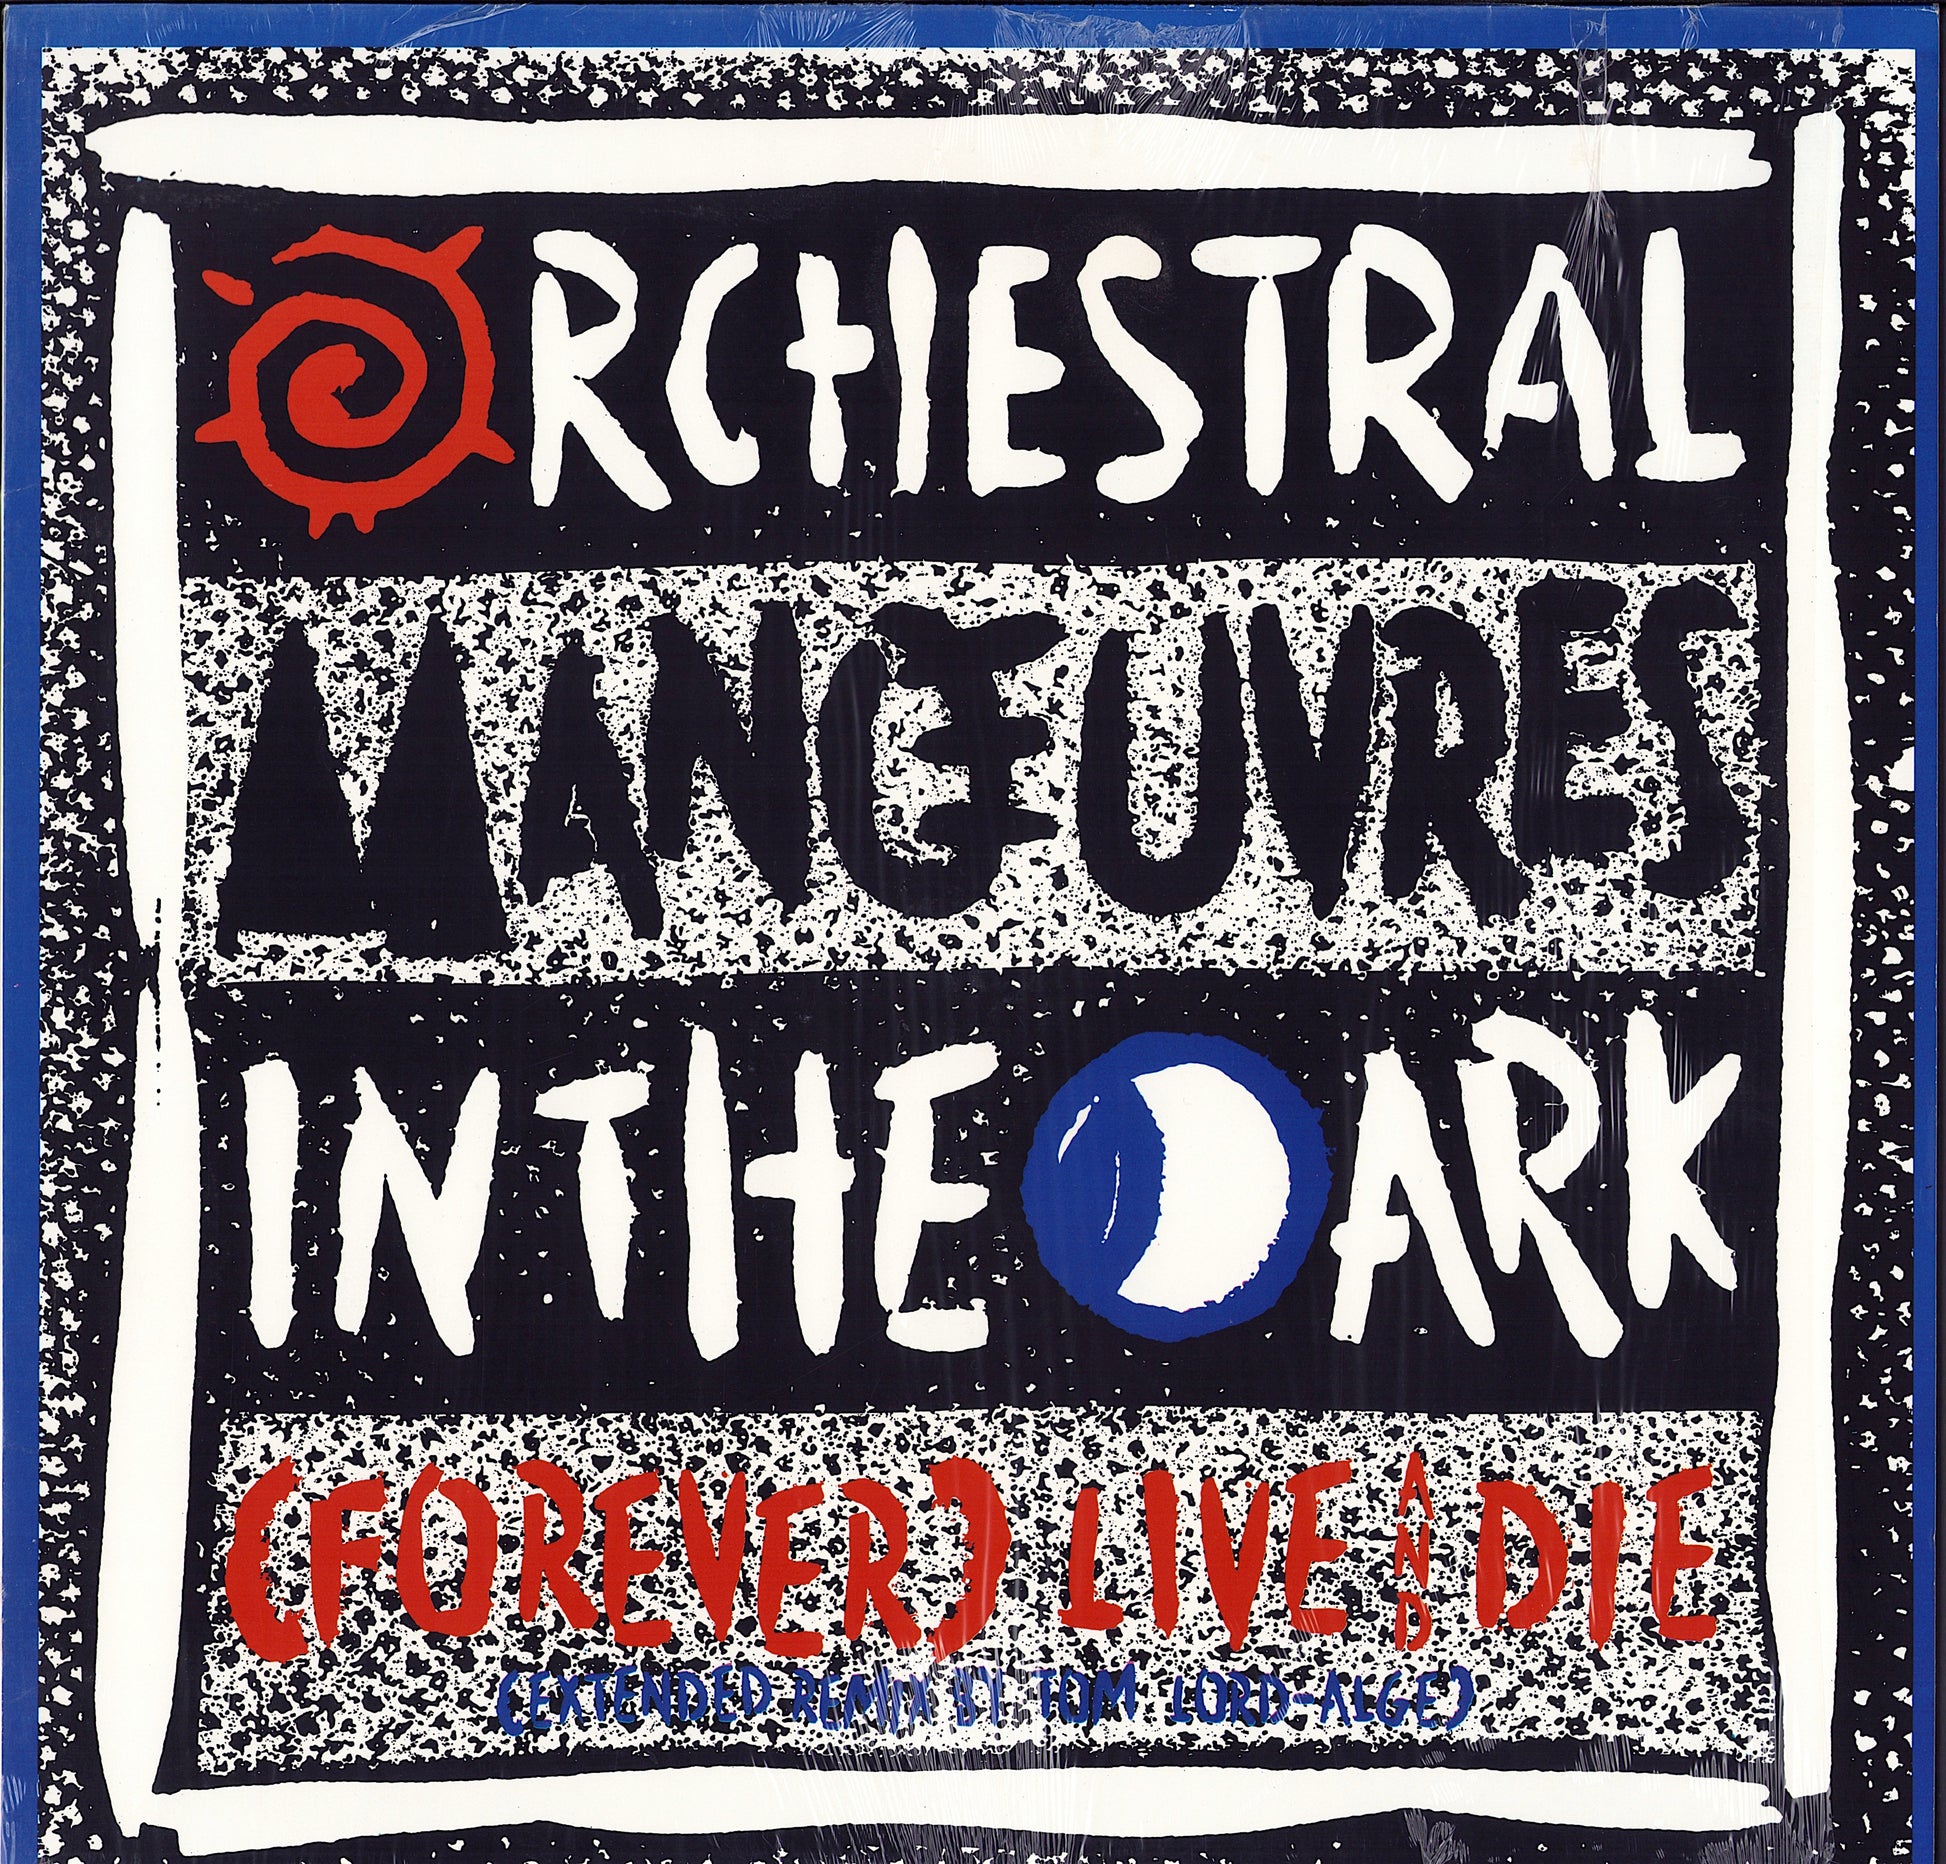 Orchestral Manœuvres In The Dark - Forever Live And Die Extended Remix Vinyl 12"